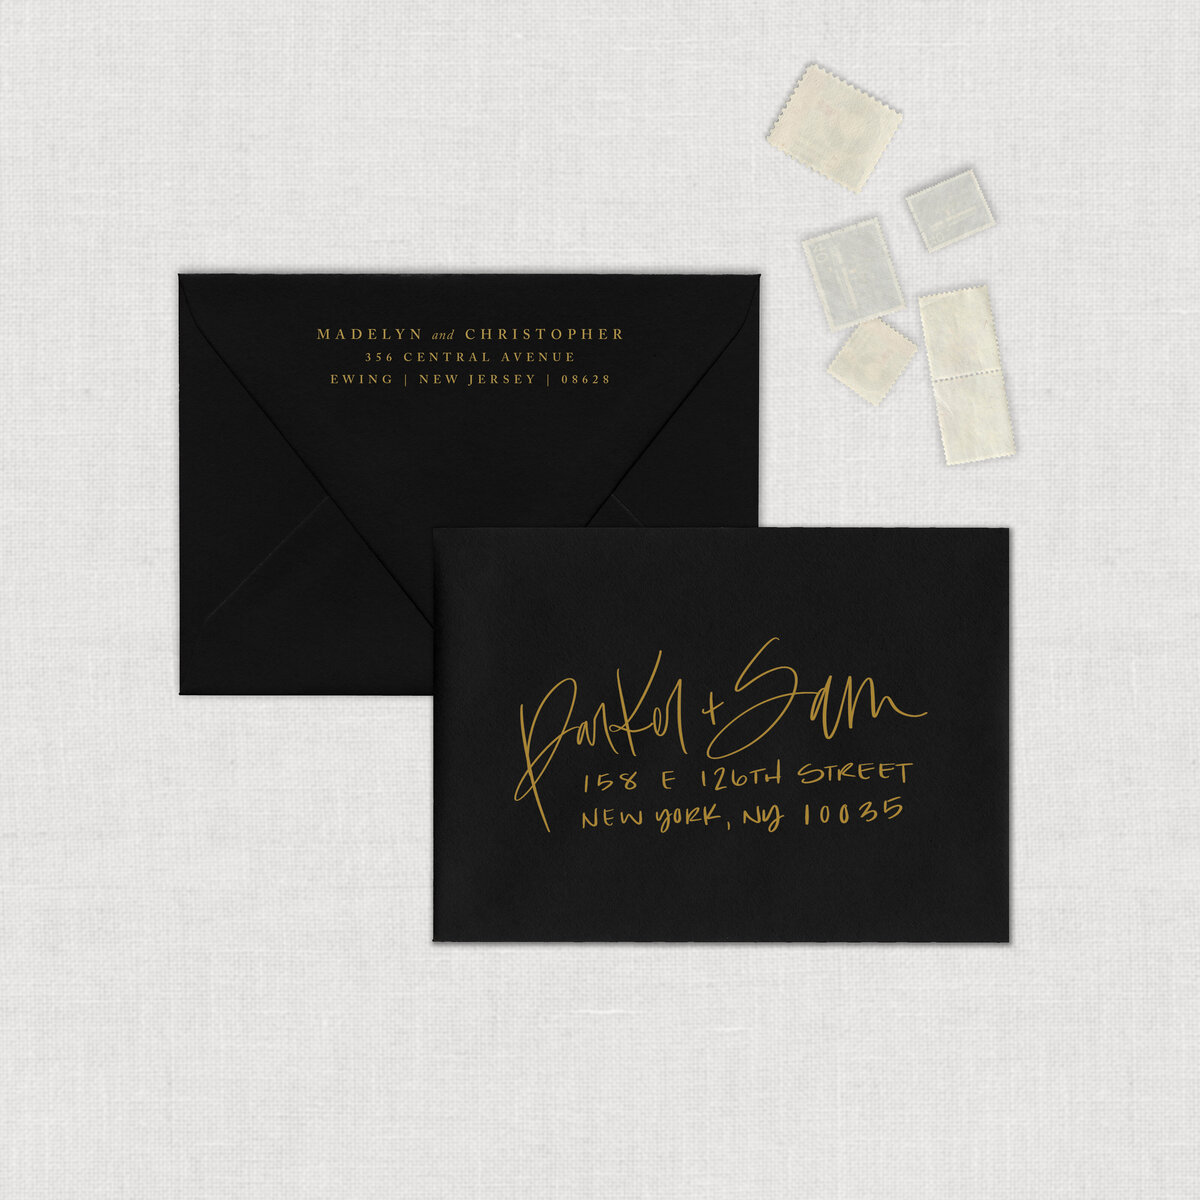 Wedding Envelope with calligraphy of guest addresses